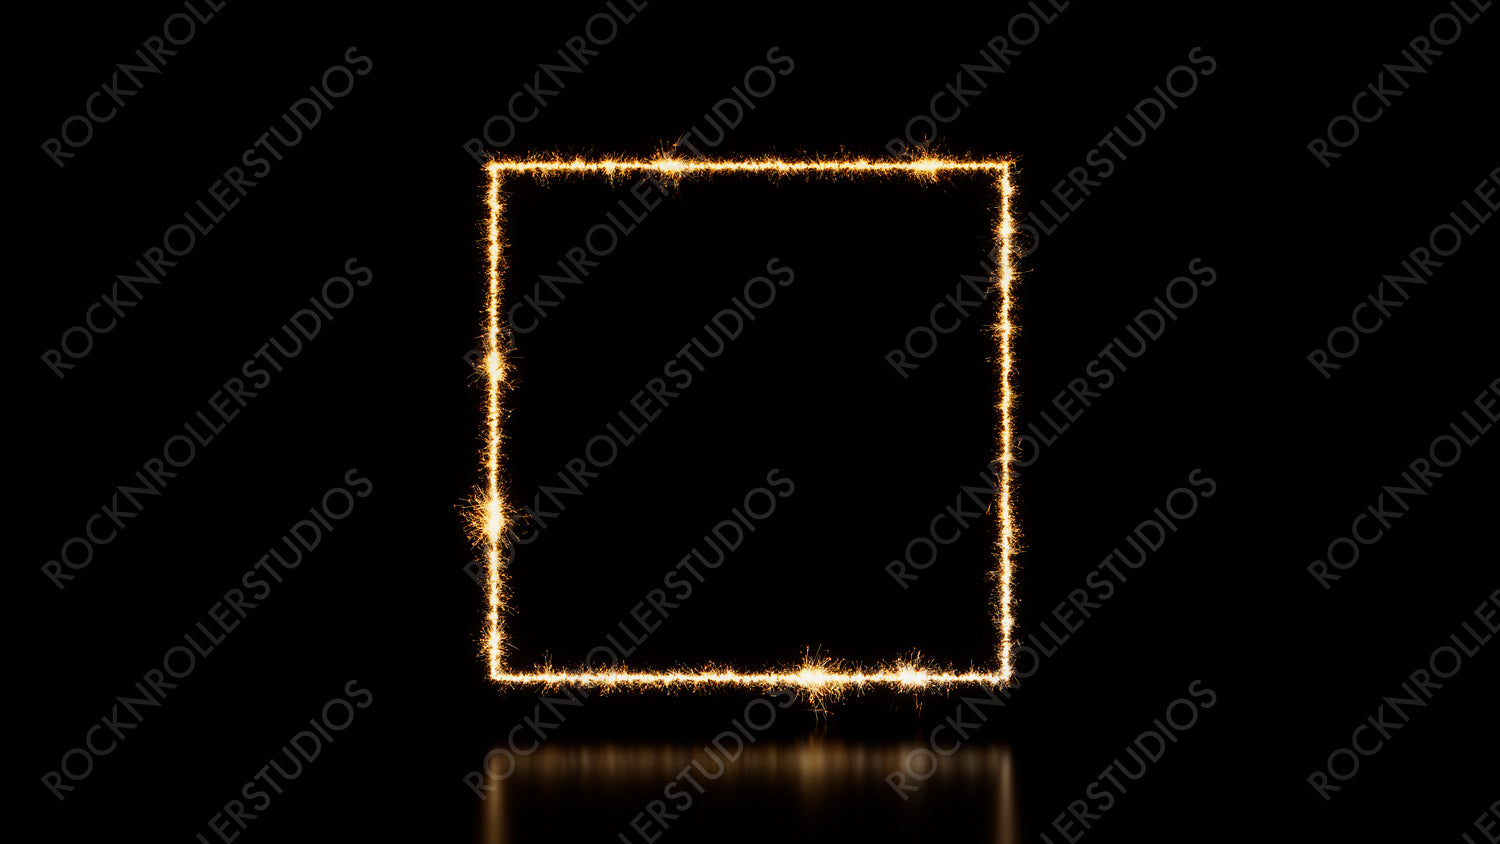 Gold Sparkler Firework Frame with Square Shape on Black. Holiday Background with copy space.